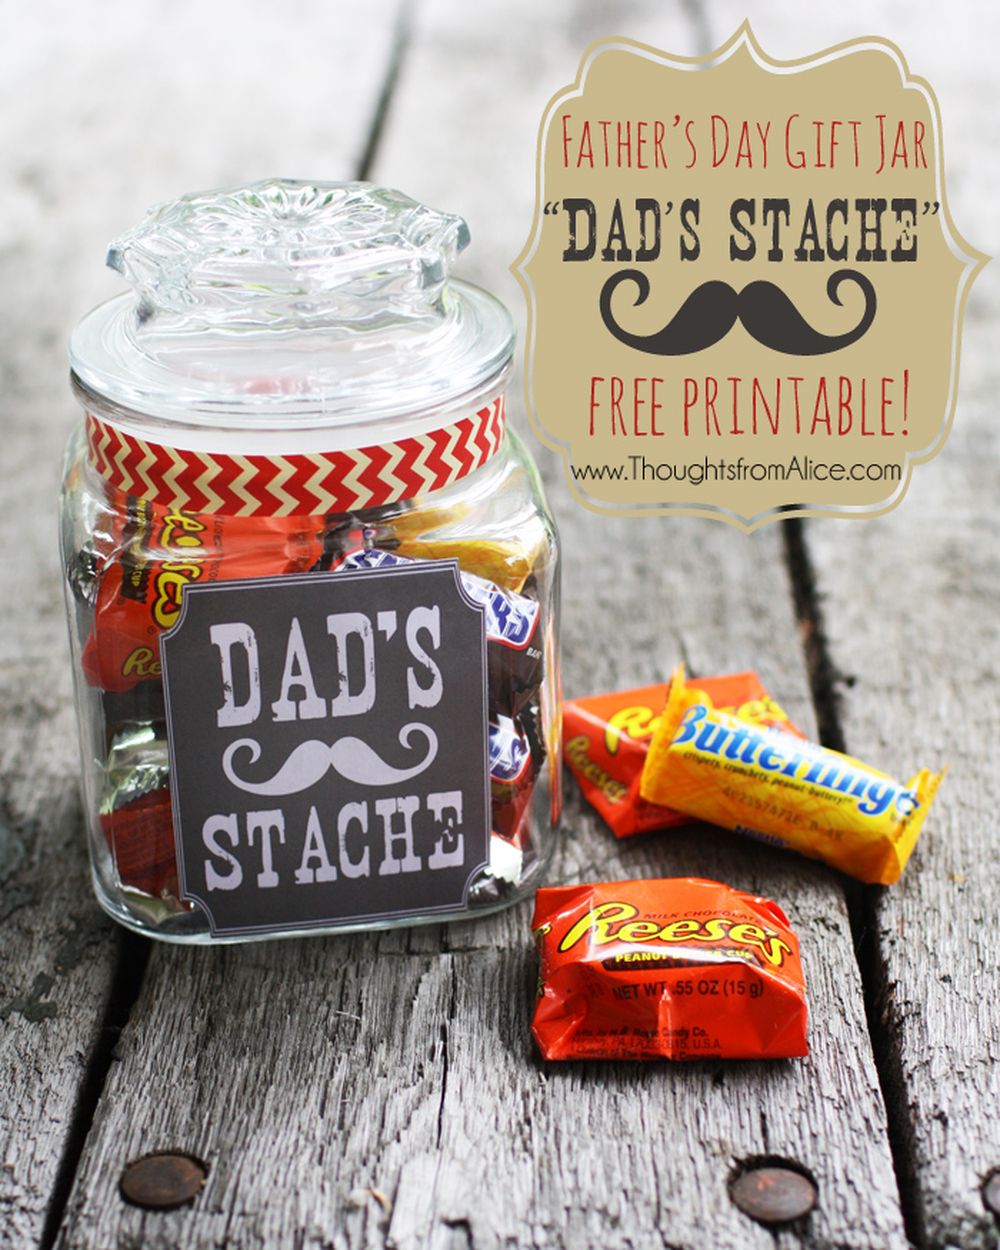 Dad's stache in a jar christmas presents for dad